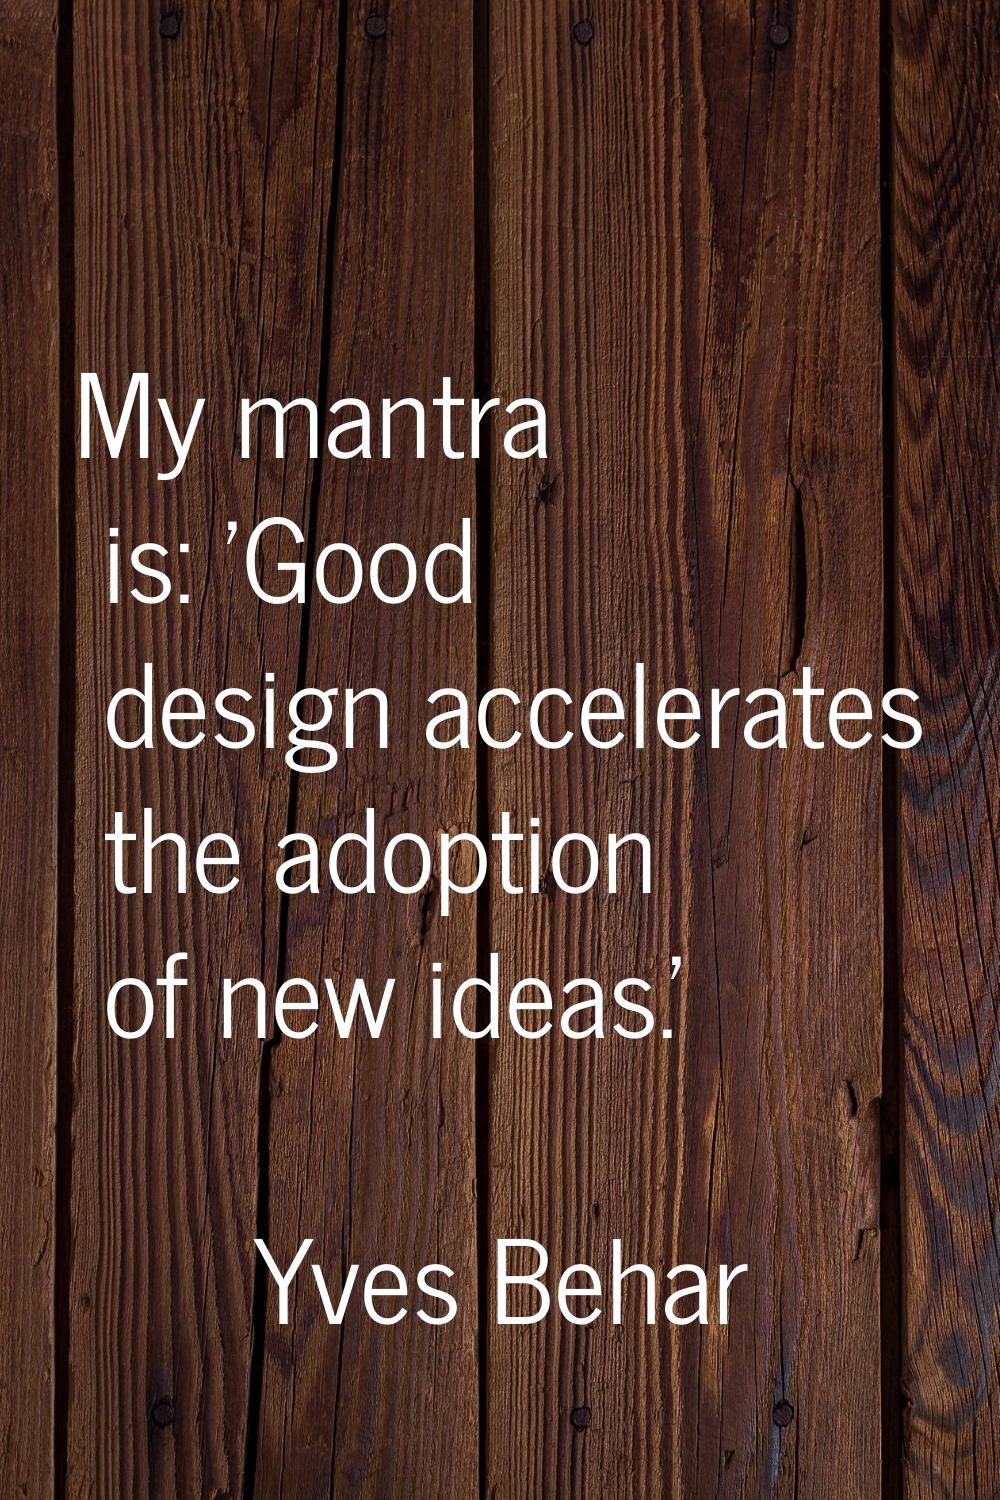 My mantra is: 'Good design accelerates the adoption of new ideas.'